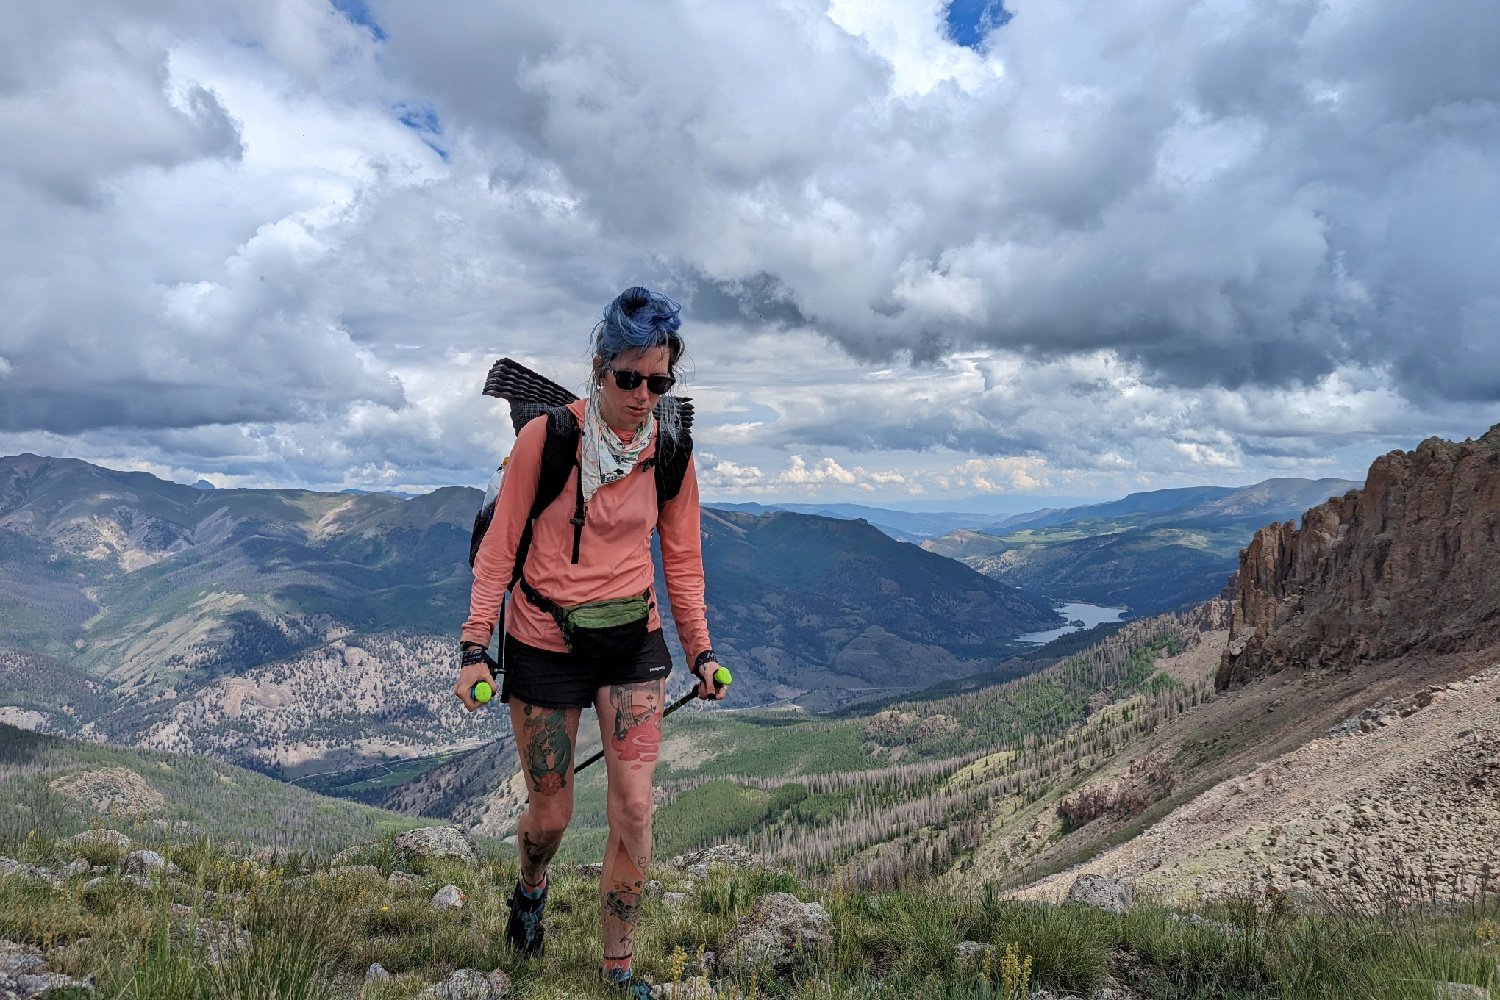 A hiker at the top of a mountain pass on the Colorado Trail